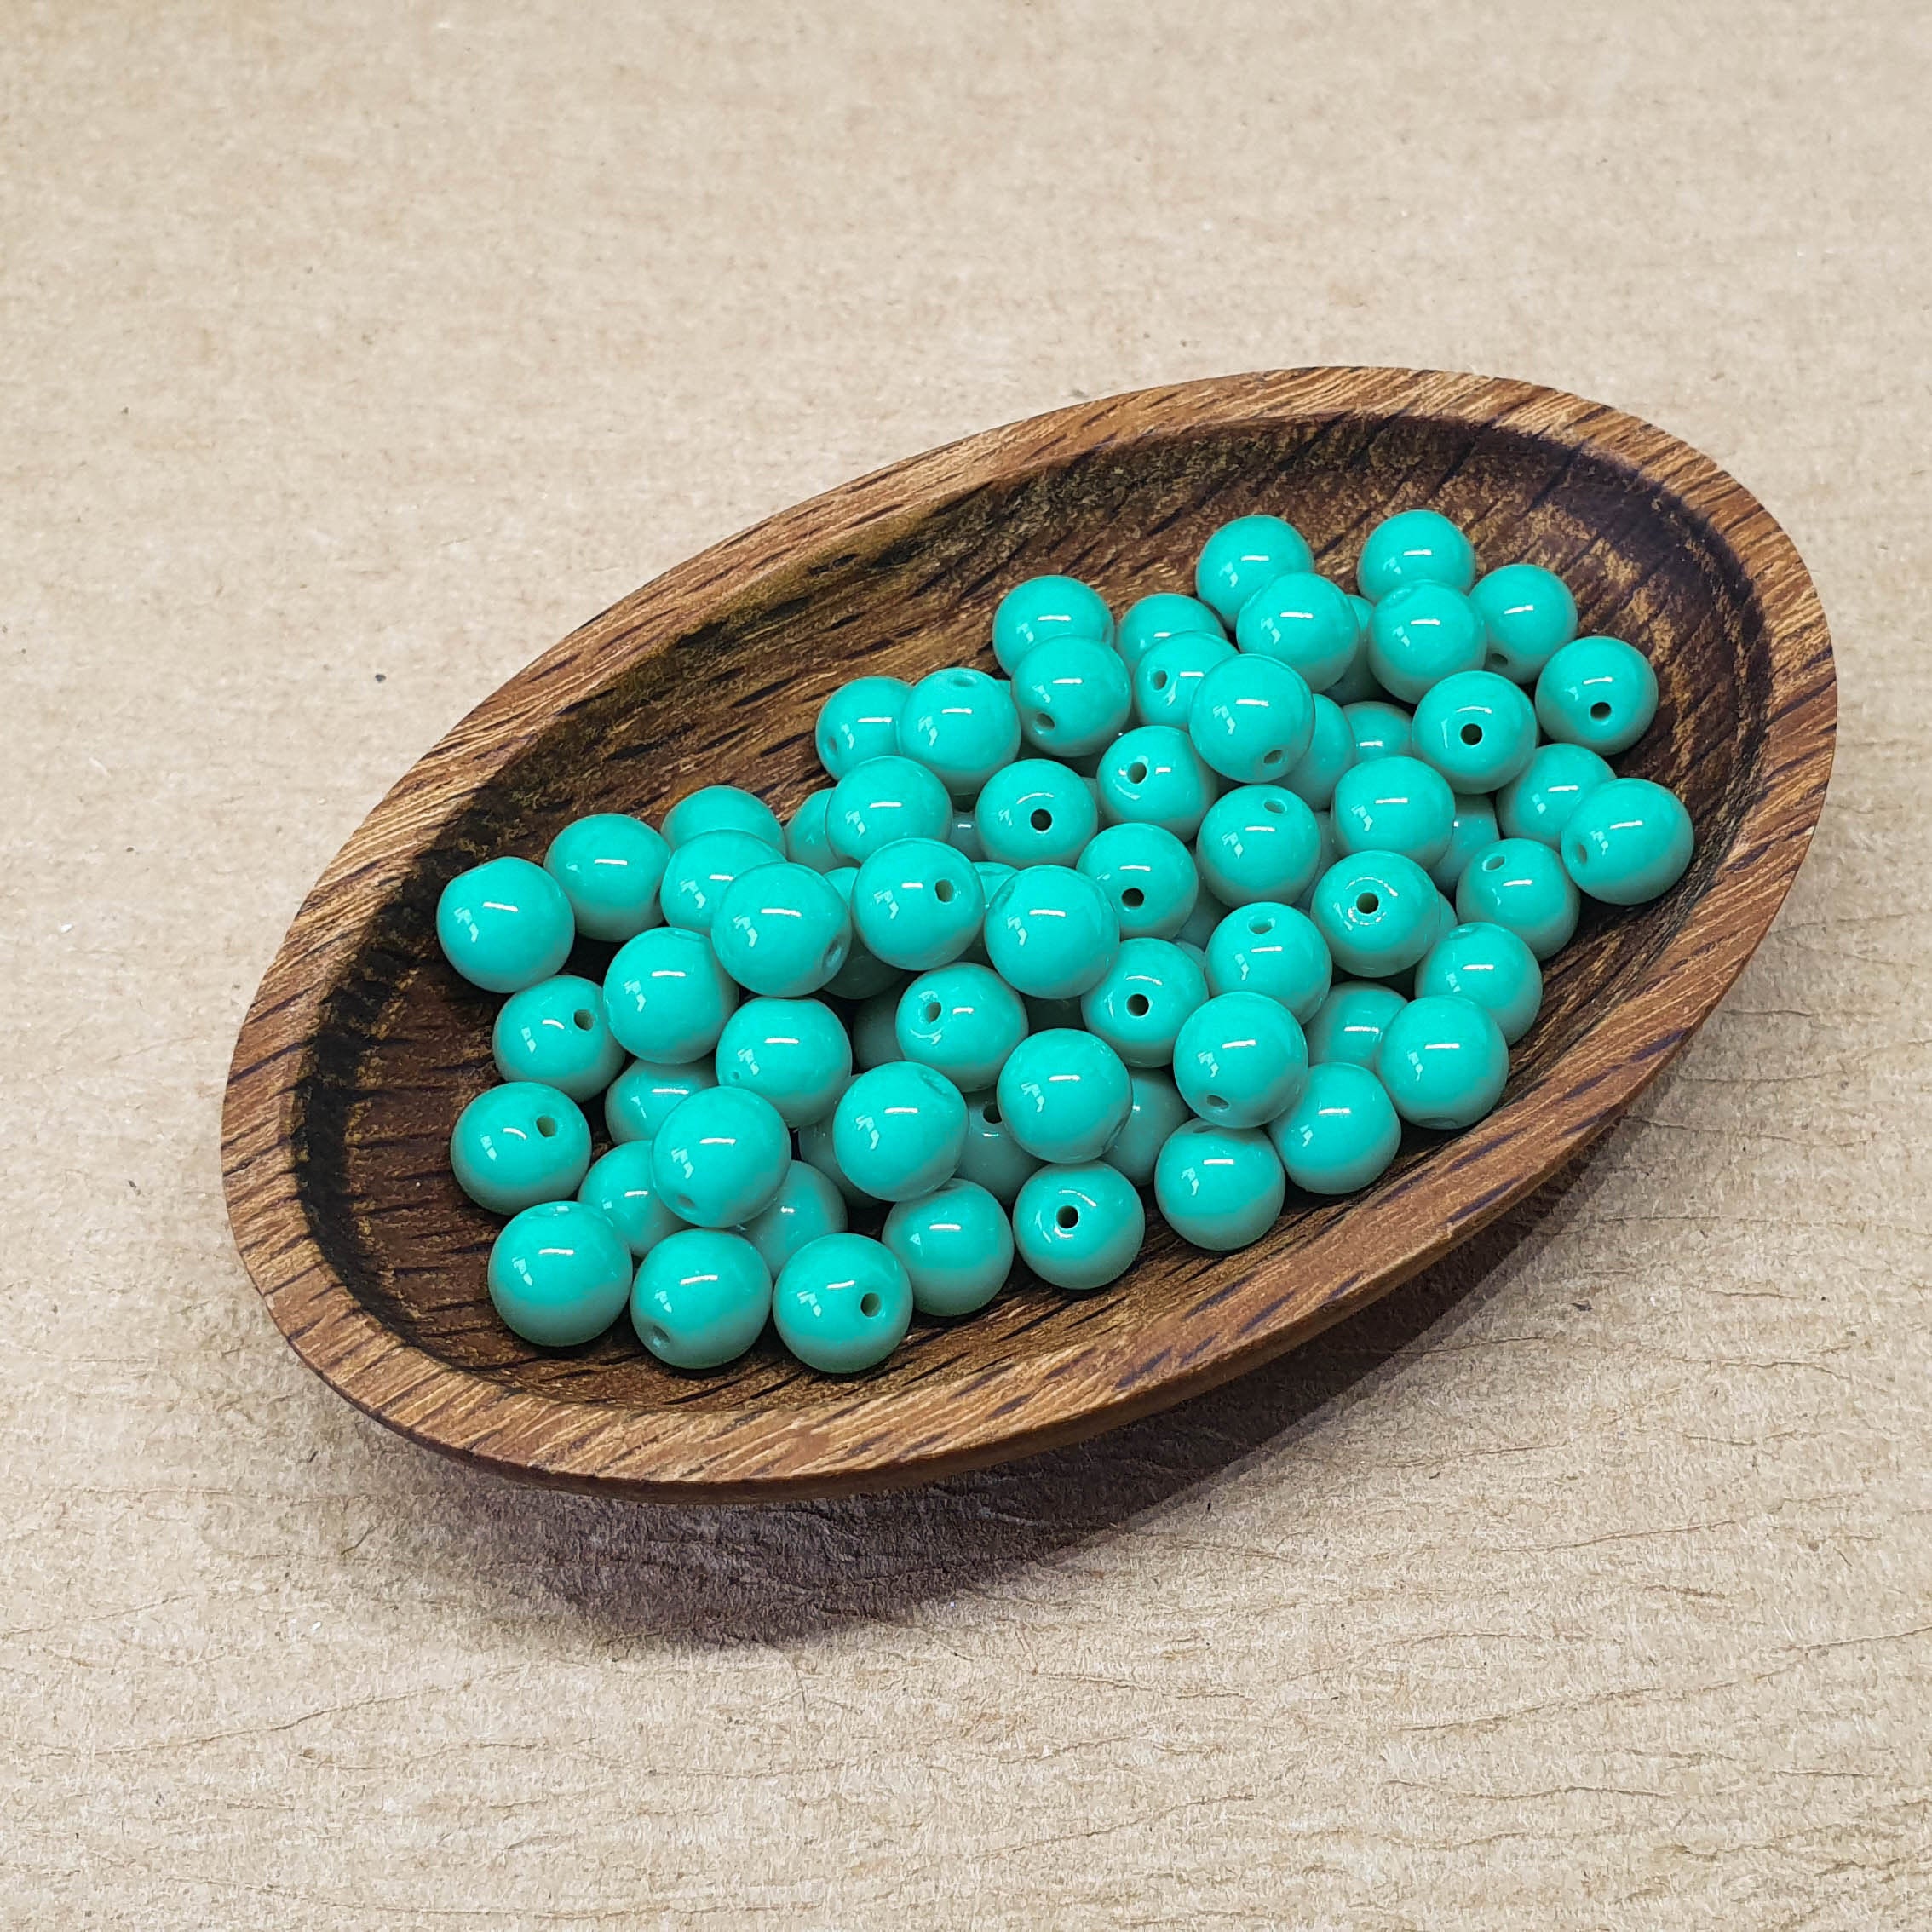 6mm Round Glass Beads - Opaque Blue Turquoise - 50 Beads – funkyprettybeads